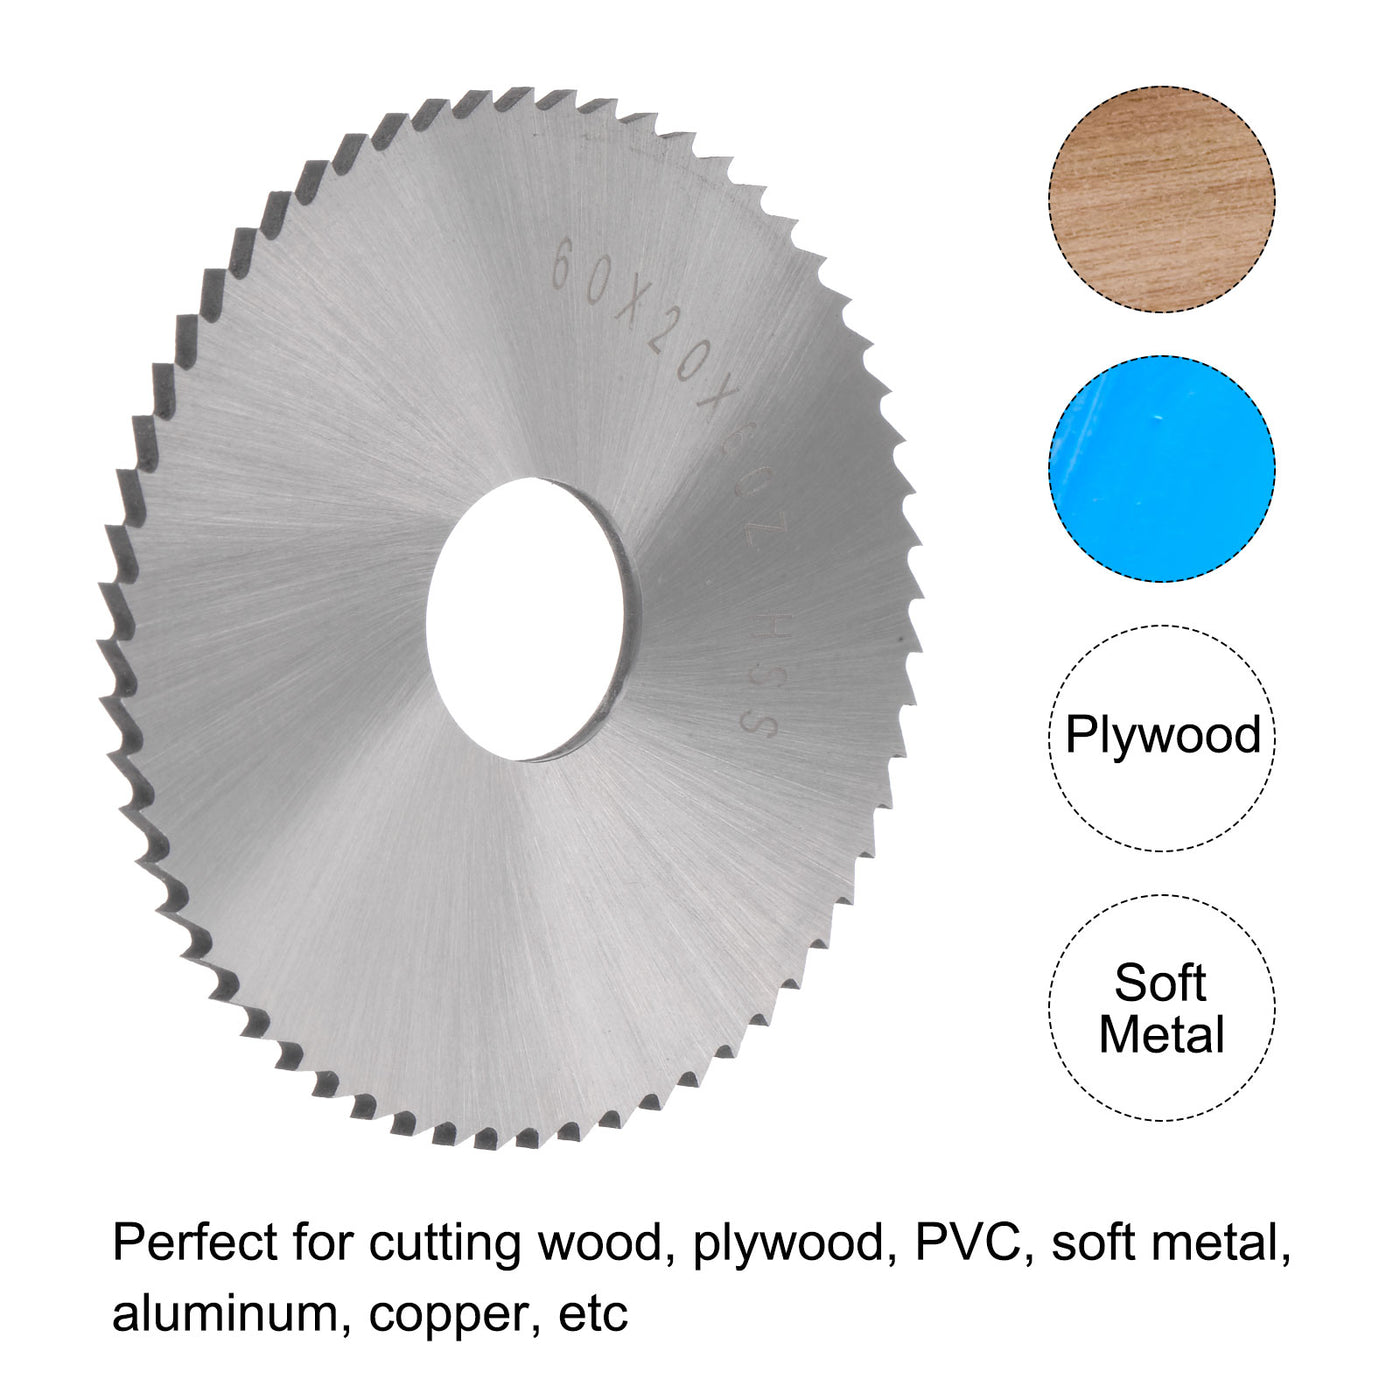 Uxcell Uxcell 80mm Dia 22mm Arbor 2.5mm Thick 60 Tooth High Speed Steel Circular Saw Blade